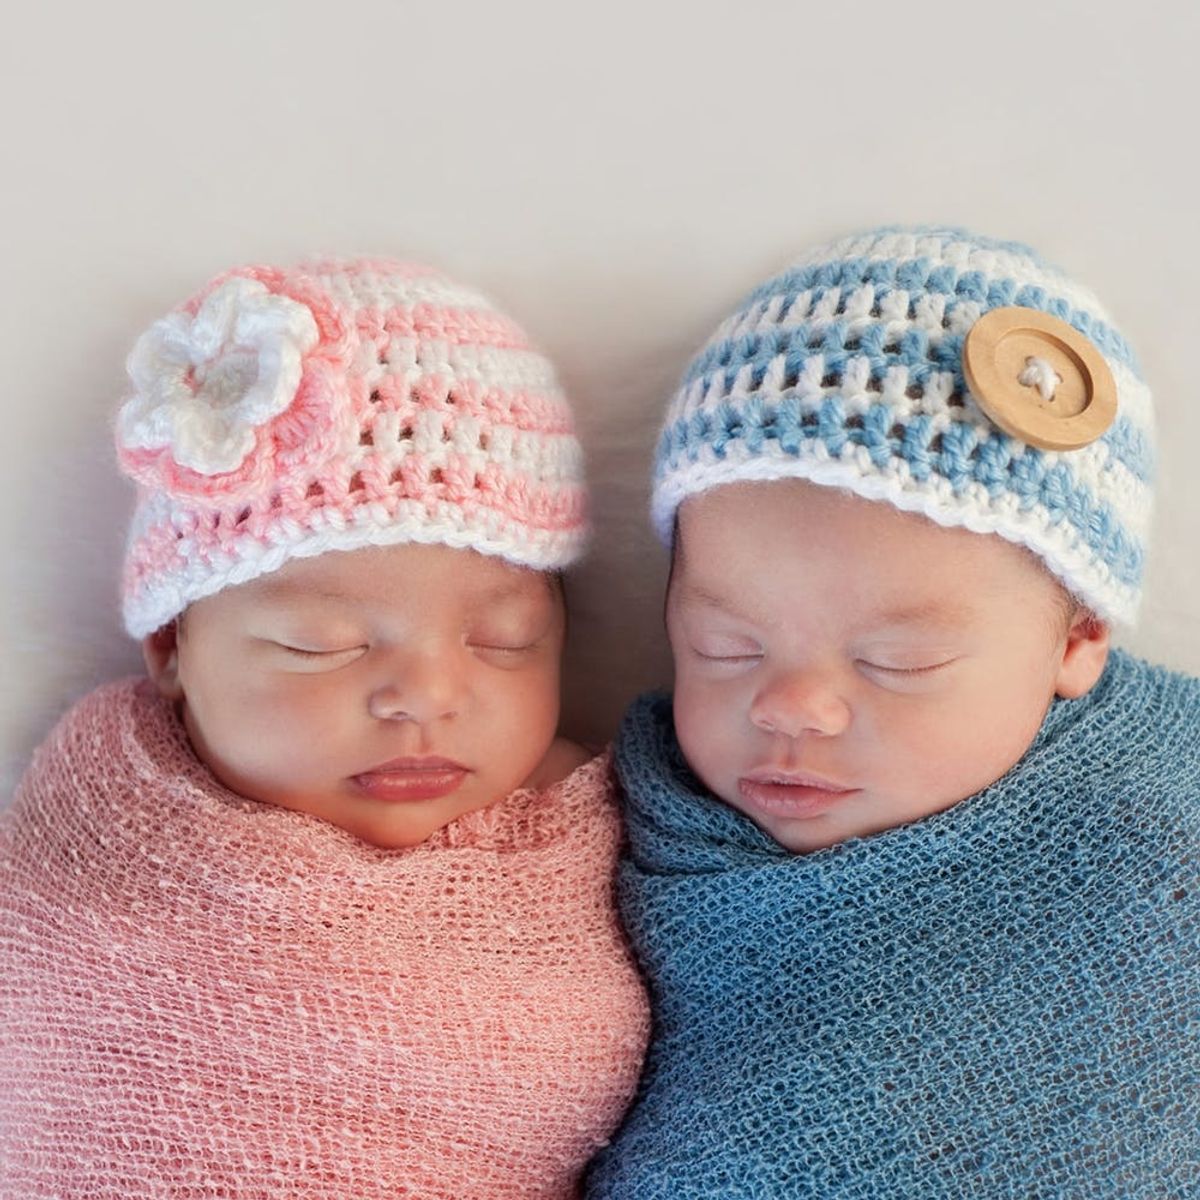 13 Baby Names That Are *Actually* Unisex